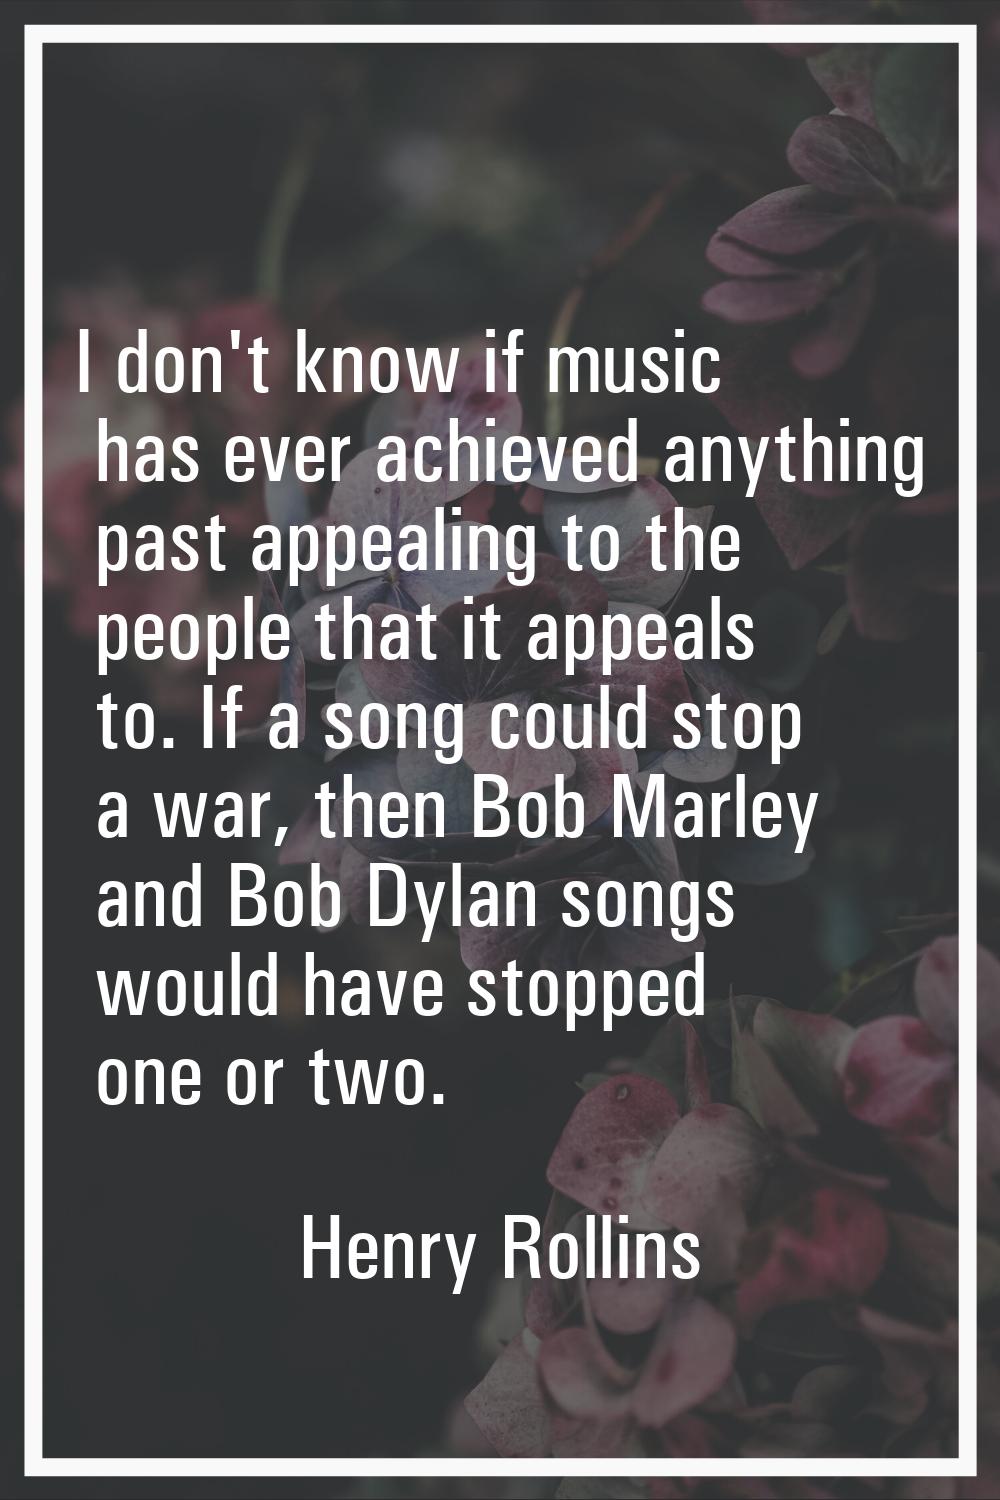 I don't know if music has ever achieved anything past appealing to the people that it appeals to. I